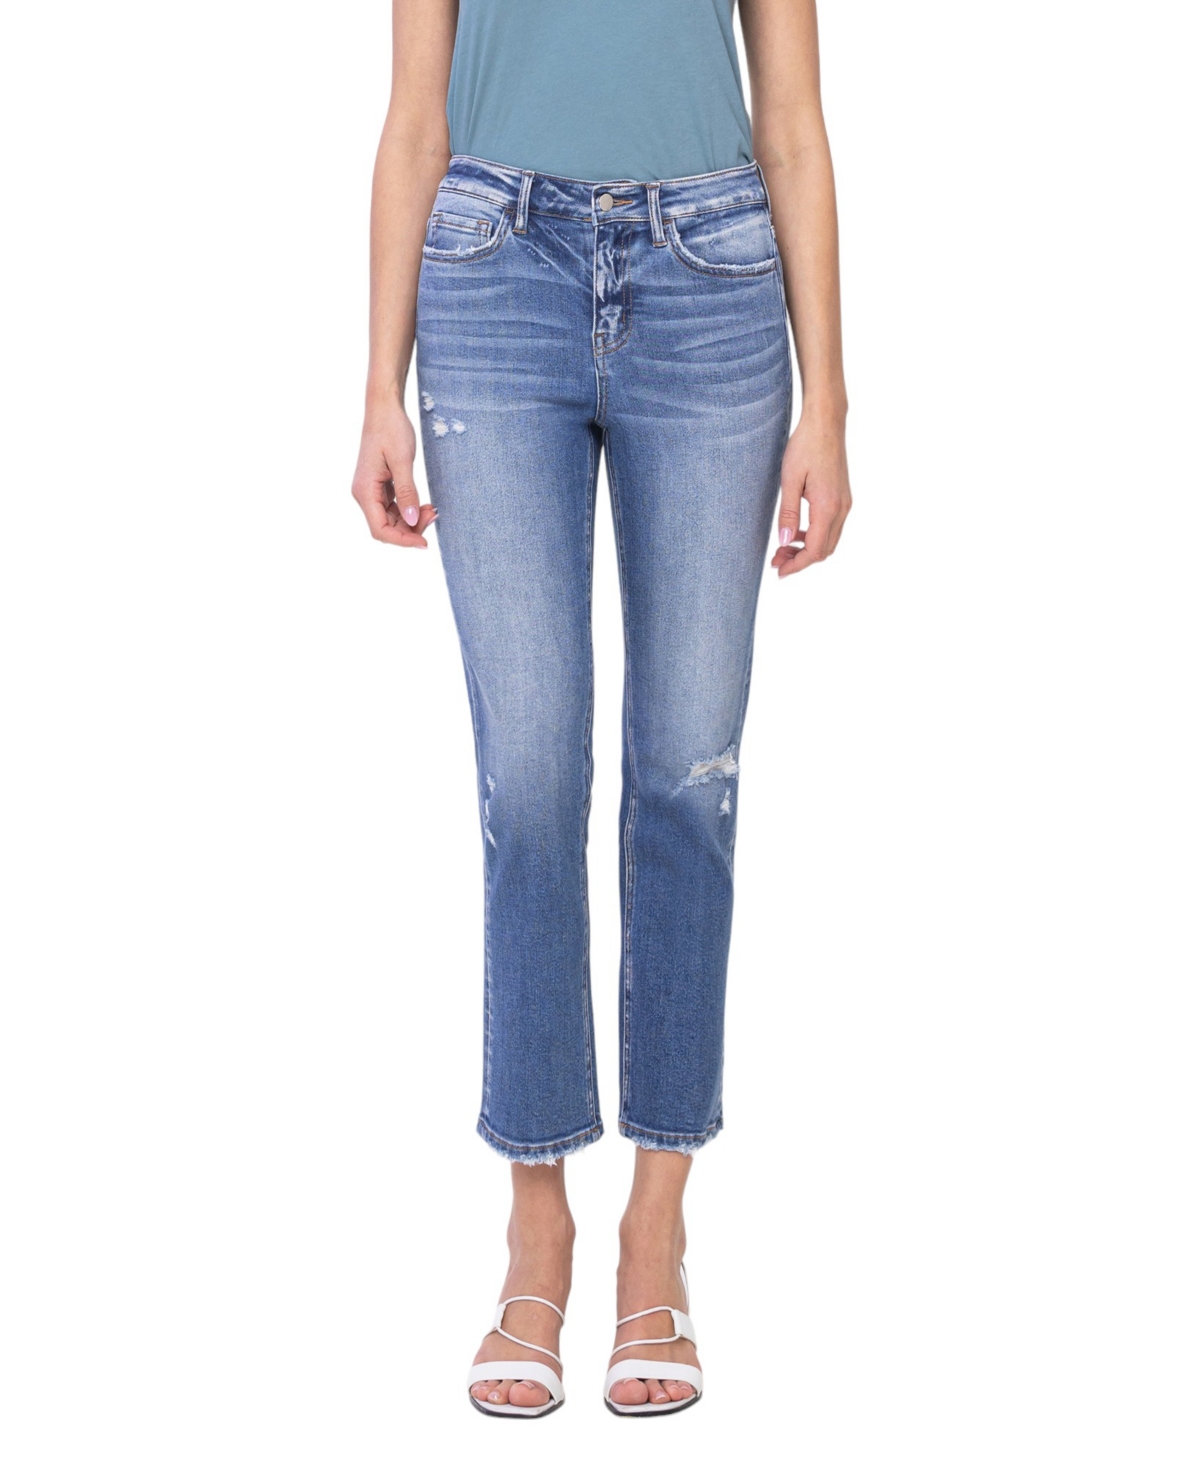 Women's High Rise Slim Straight Jeans - Excellant blue